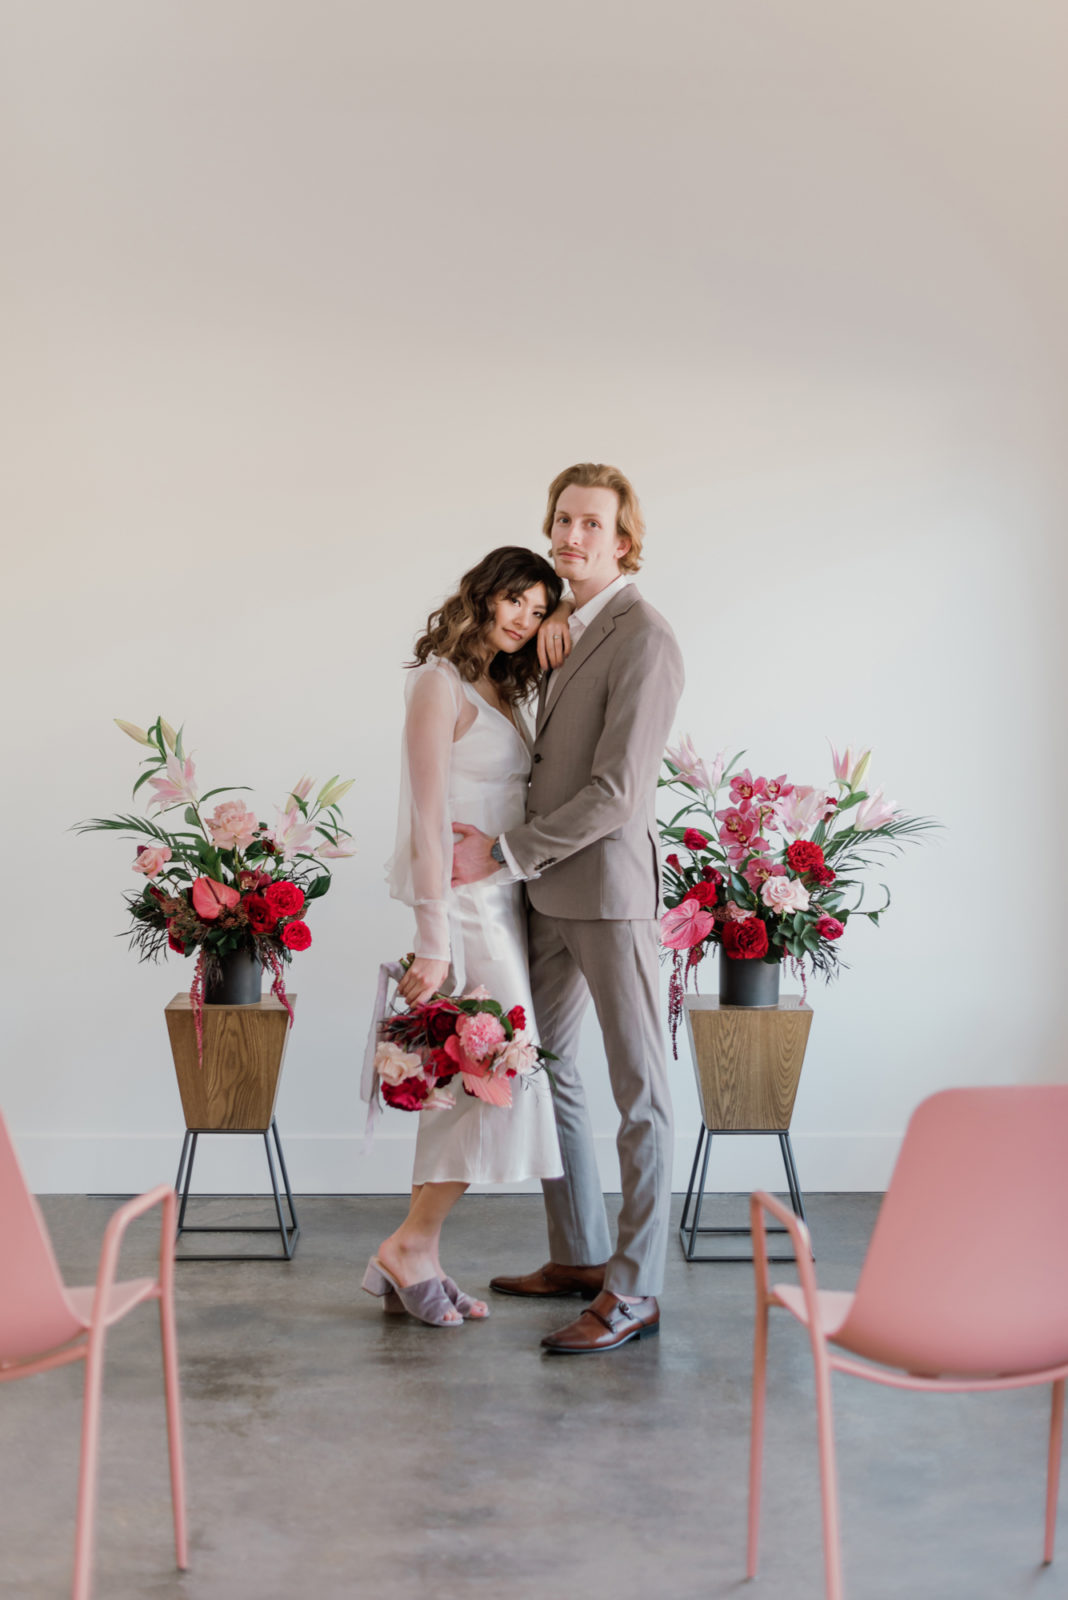 Bride in a short white dress and groom in a grey suit pose in front of berry hued florals for their modern microwedding inspiration ceremony